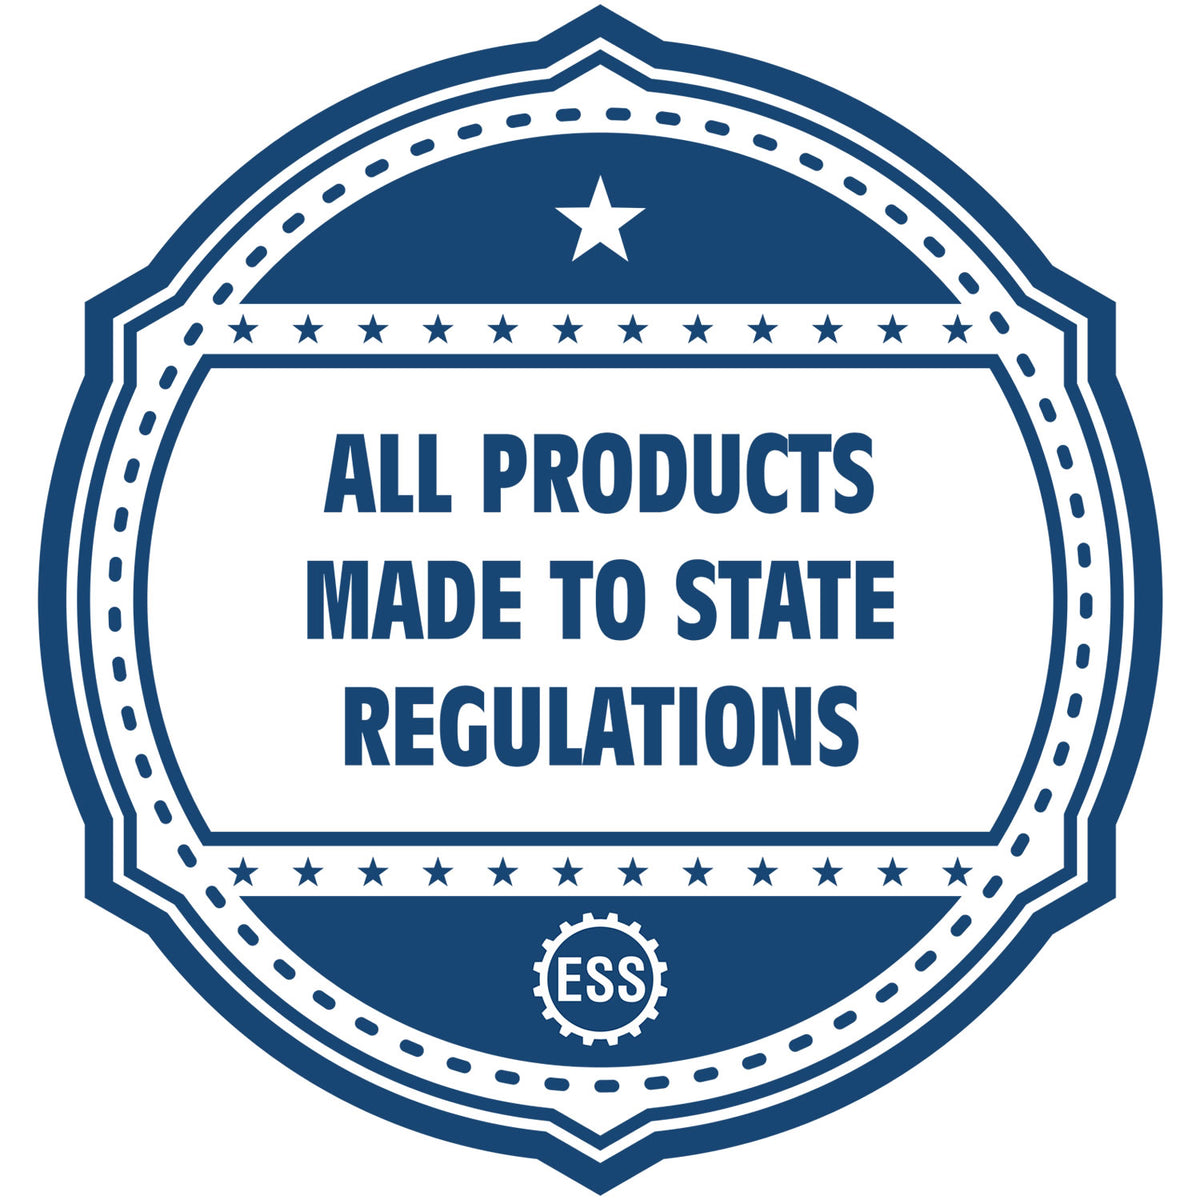 A blue icon or badge for the Hybrid New Jersey Architect Seal showing that this product is made in compliance with state regulations.